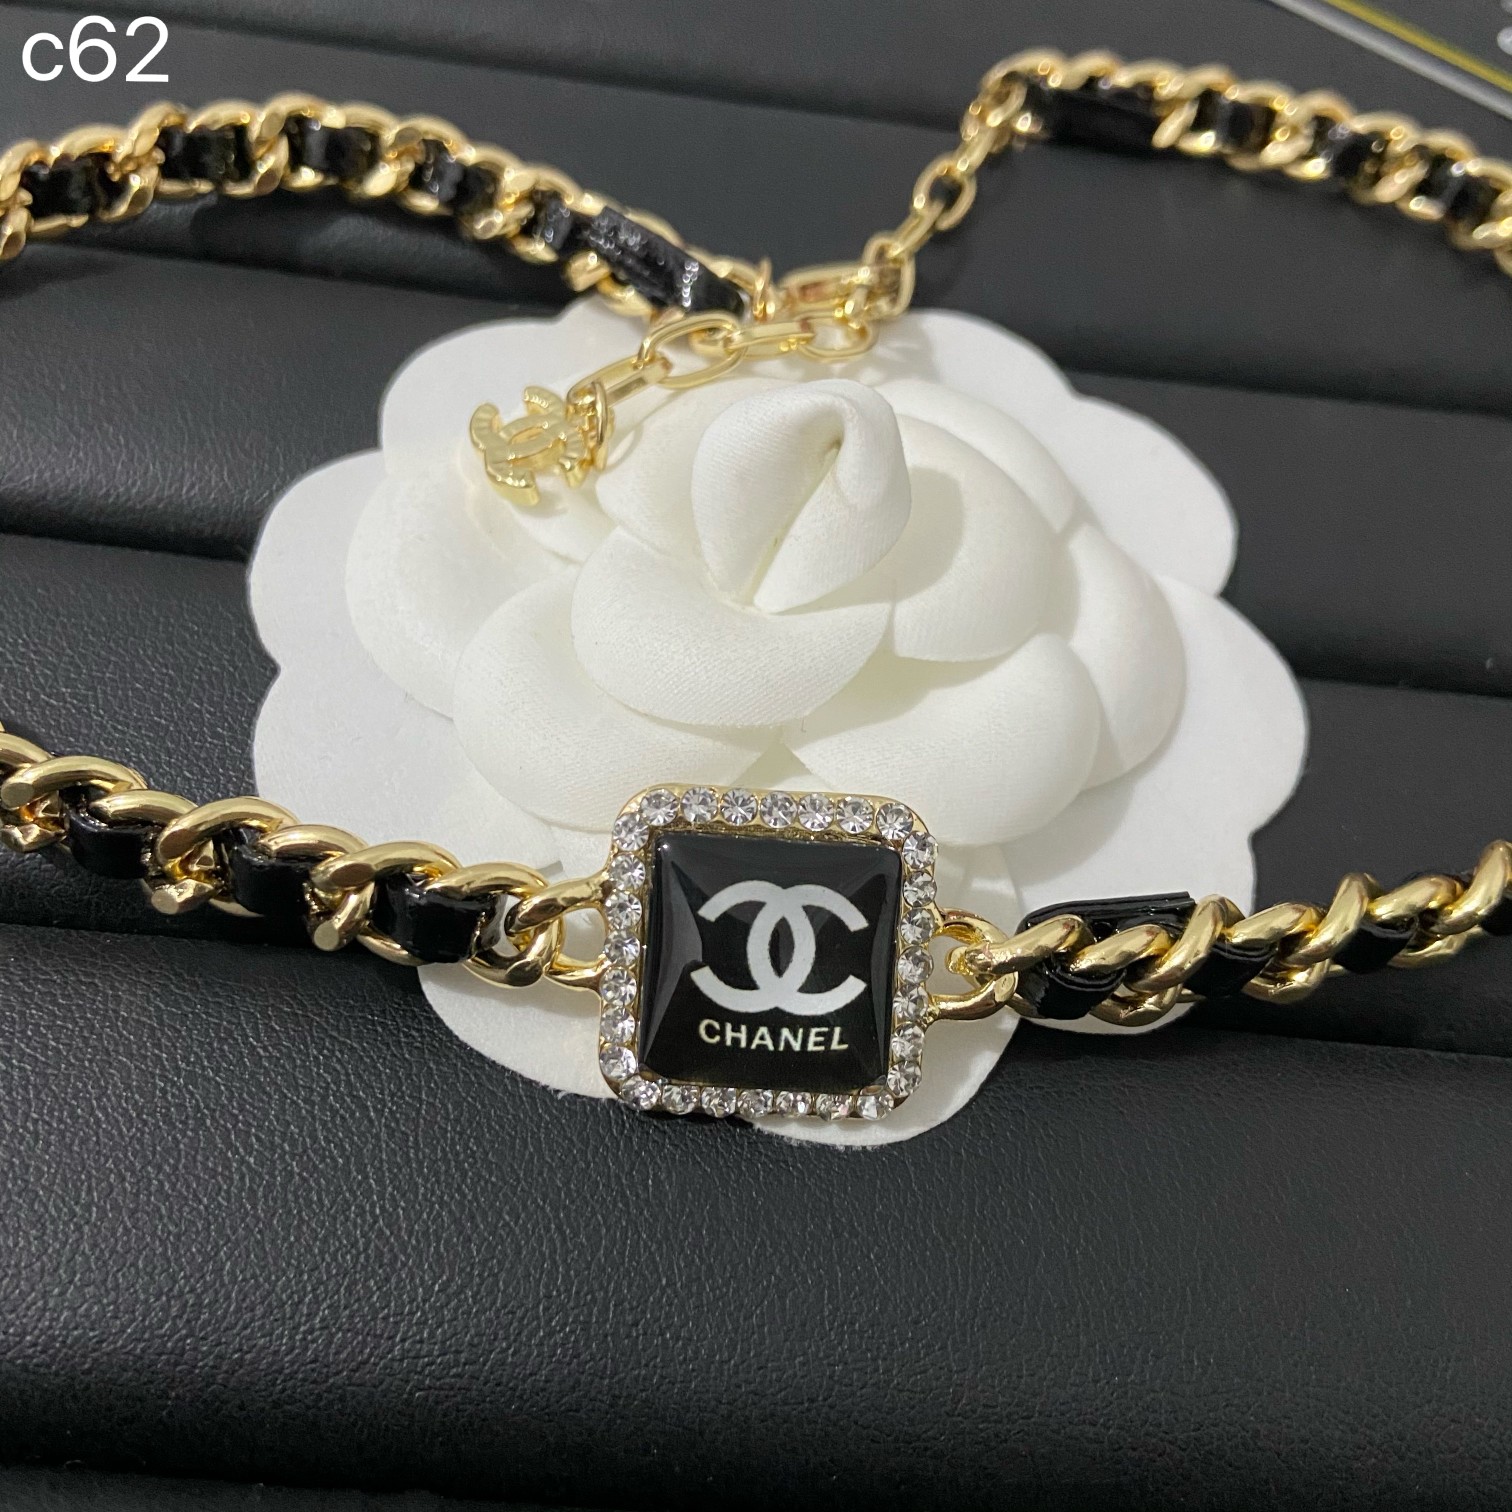 Chanel necklace 107525